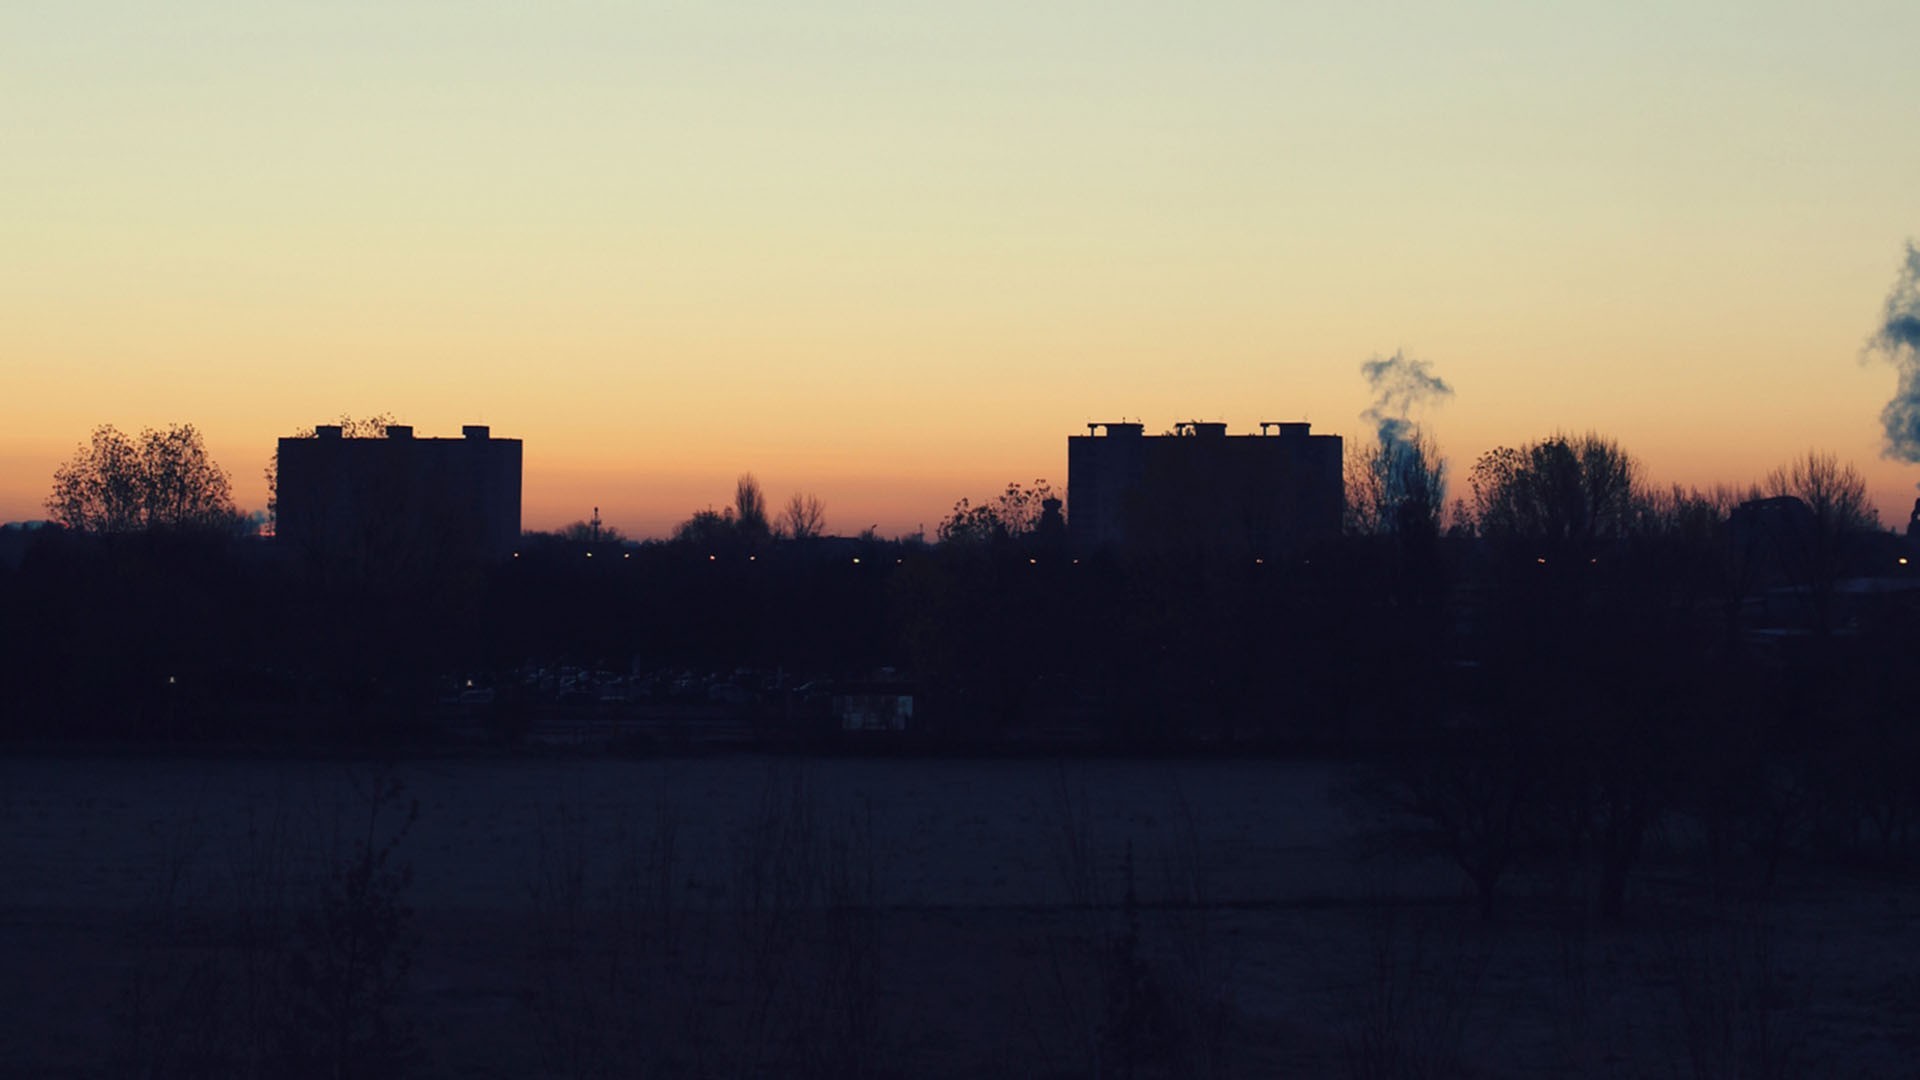 General 1920x1080 sunset urban building silhouette